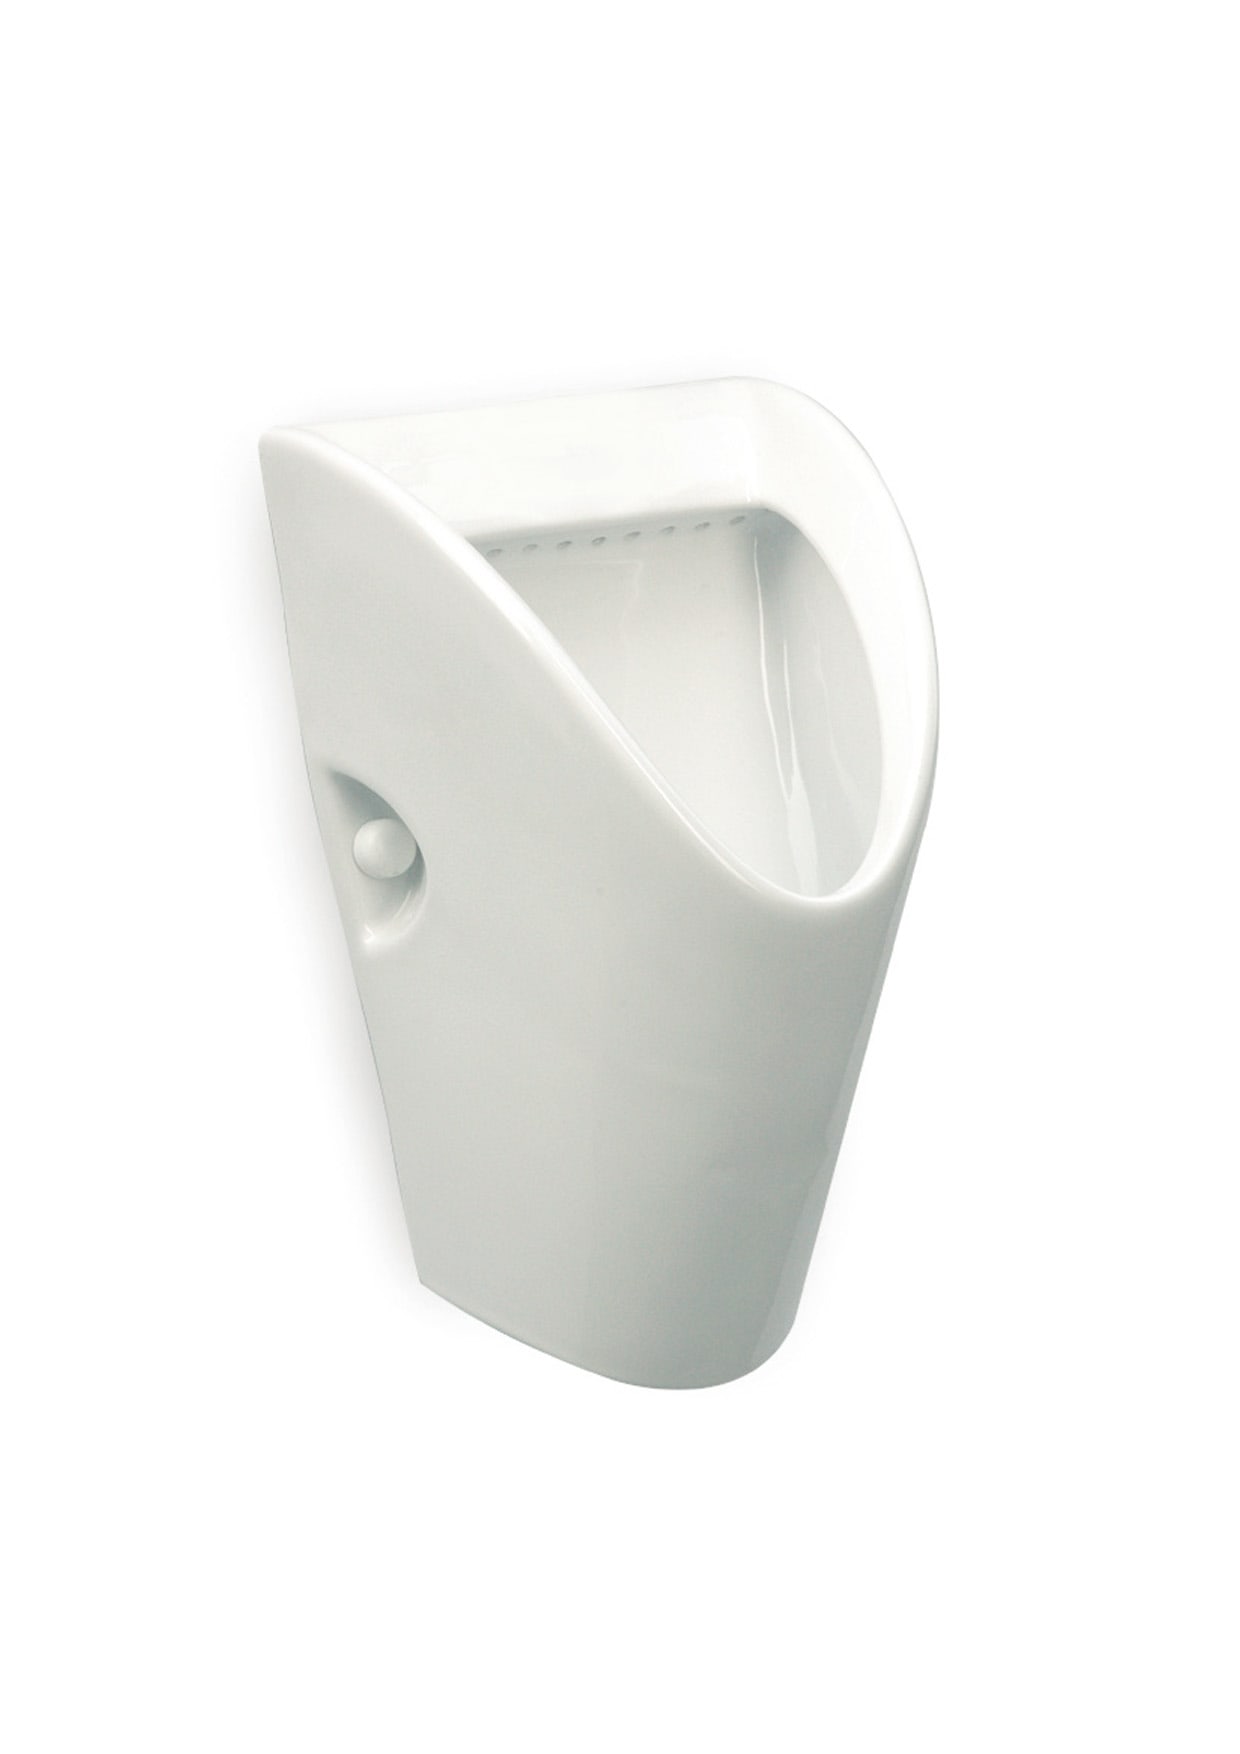 Vitreous china urinal with back inlet2-CHIC